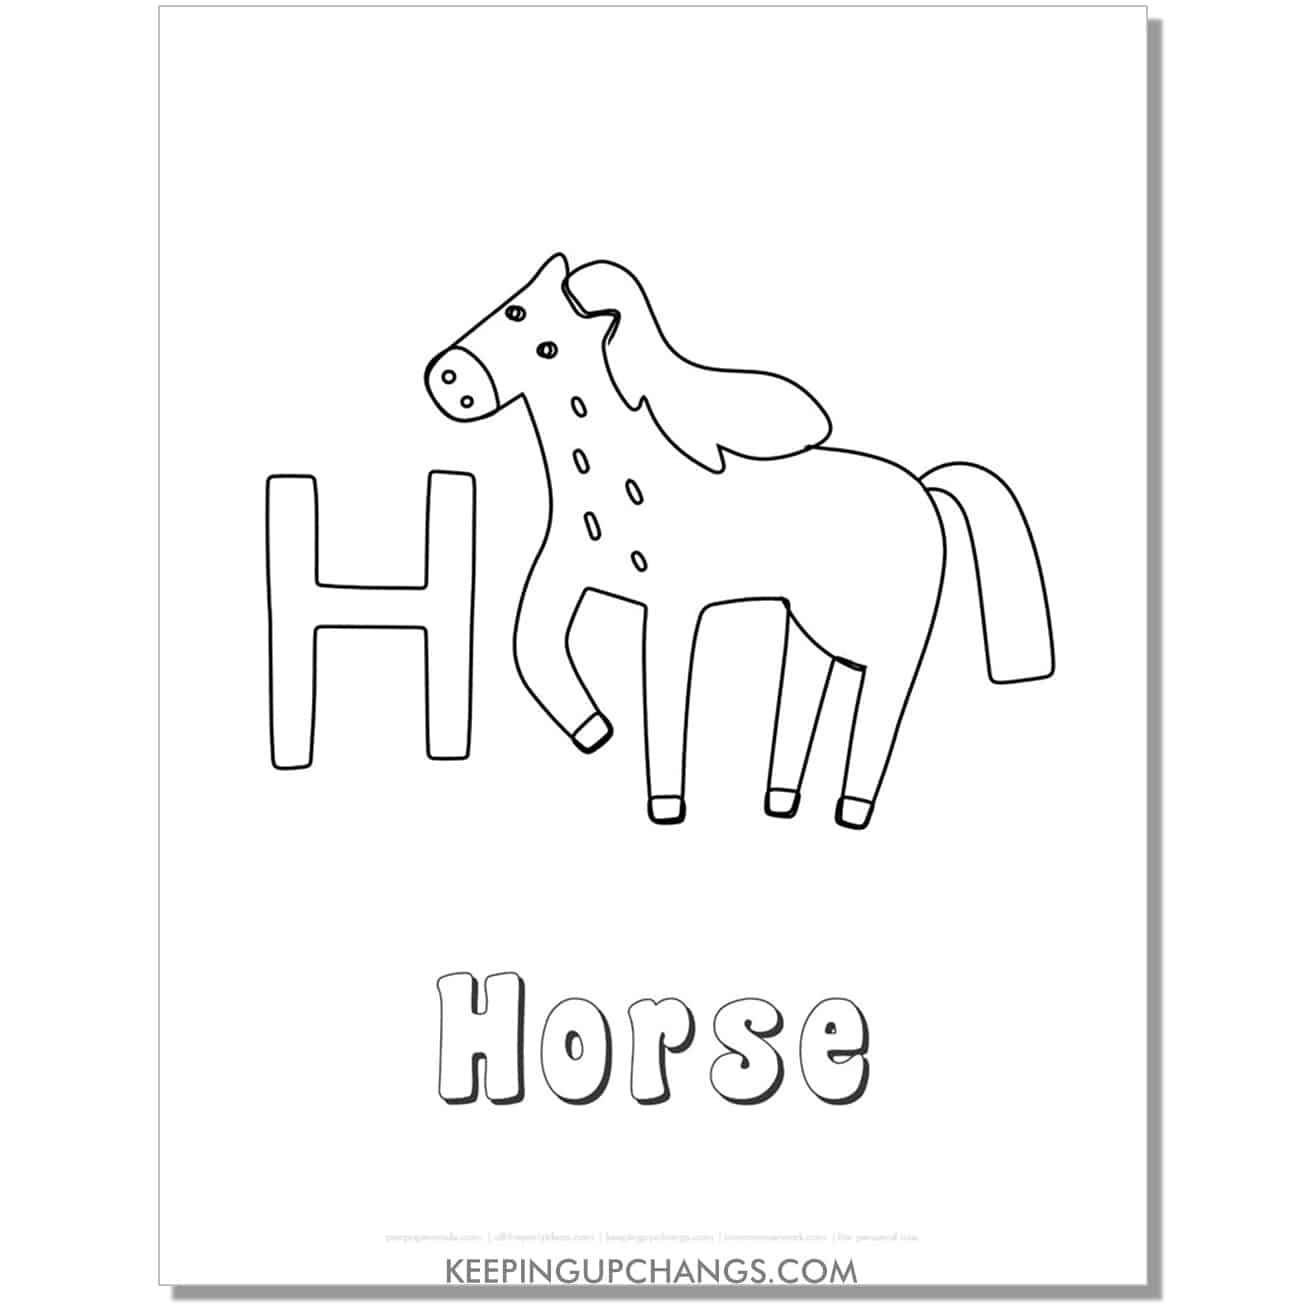 fun abc h coloring page with horse hand drawing.